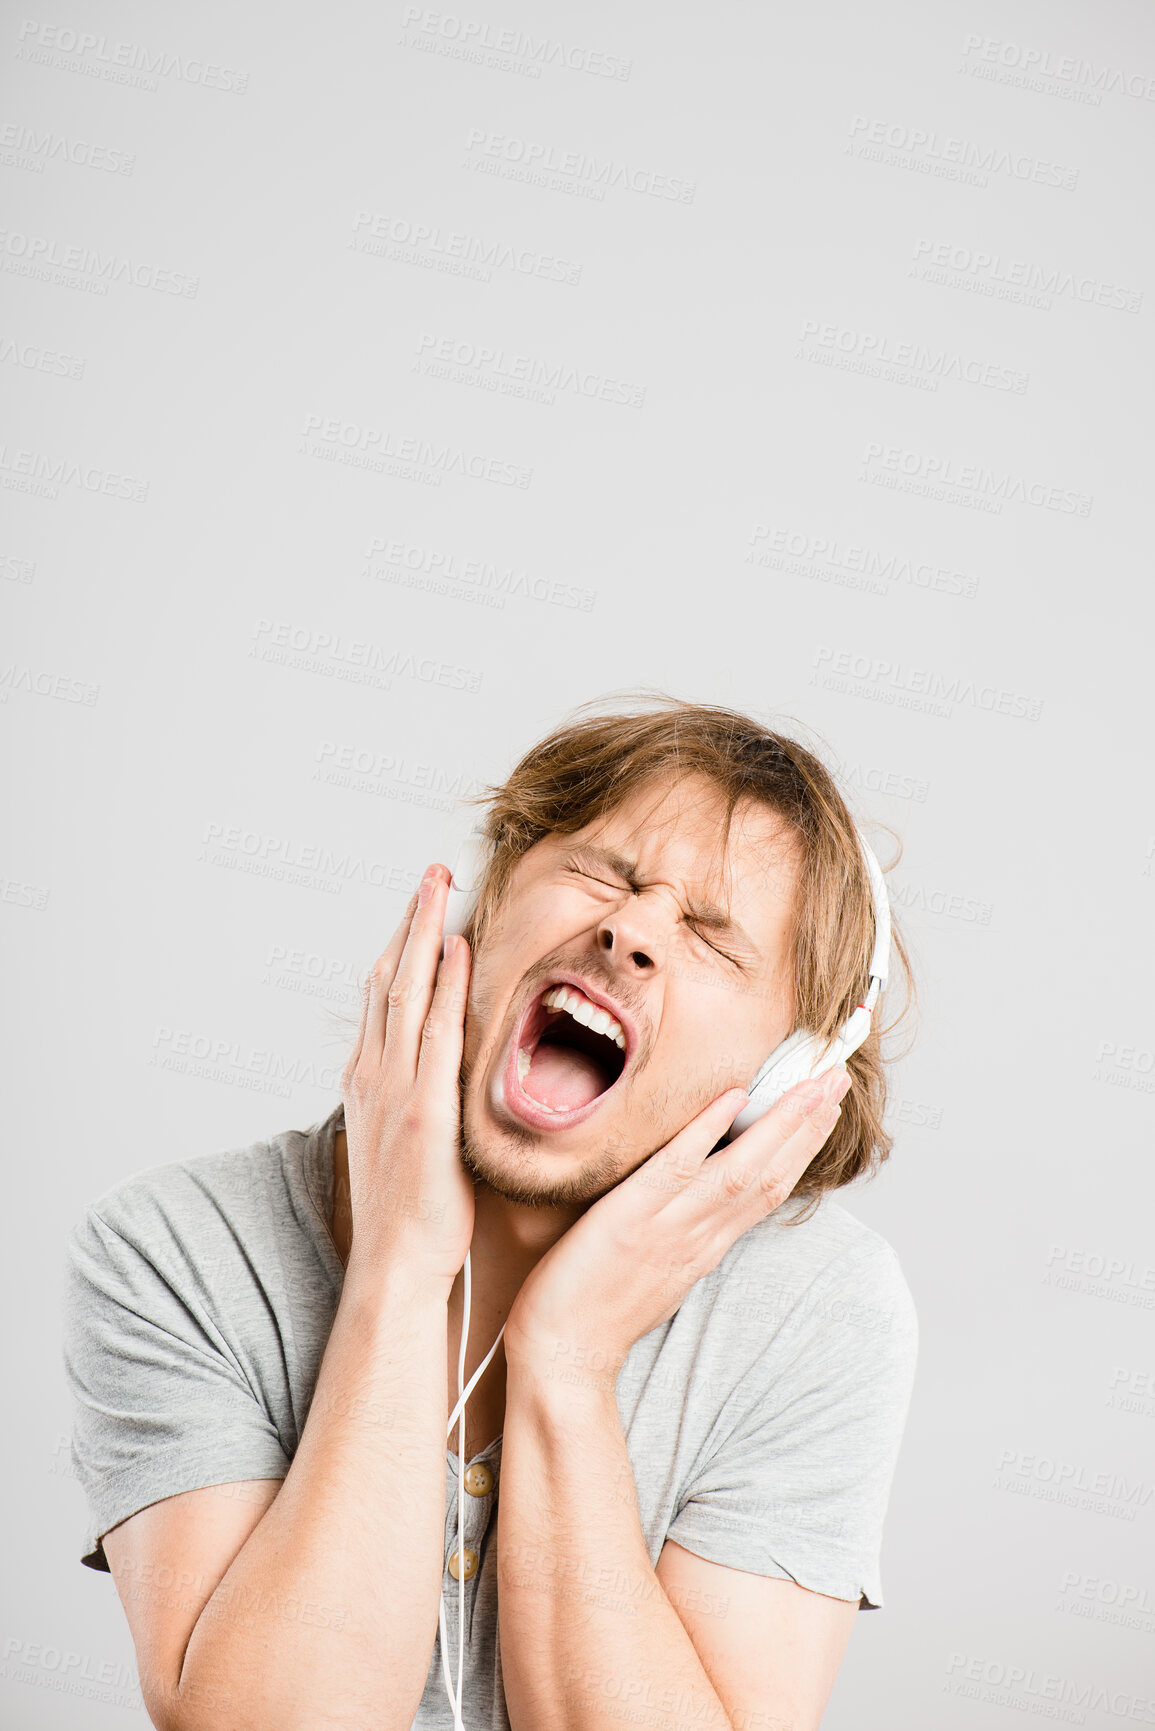 Buy stock photo Shot of a handsome young man standing alone in the studio and listening to music through headphones